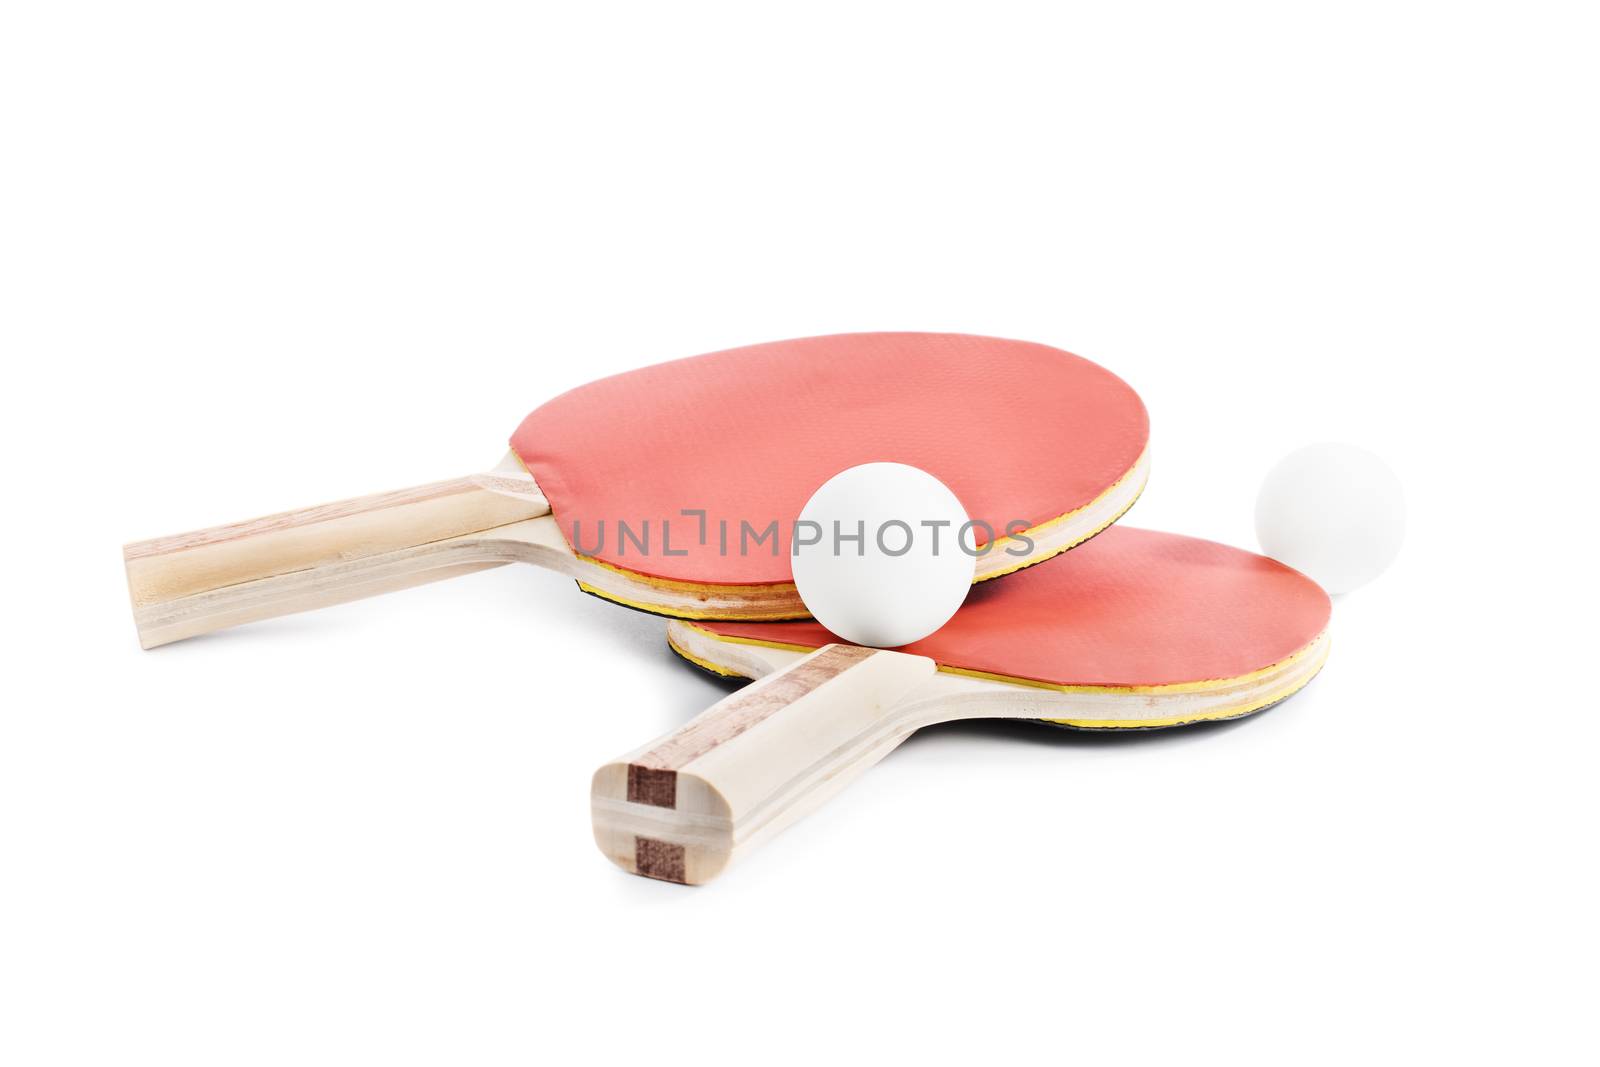 Ping Pong bats with balls by Mendelex